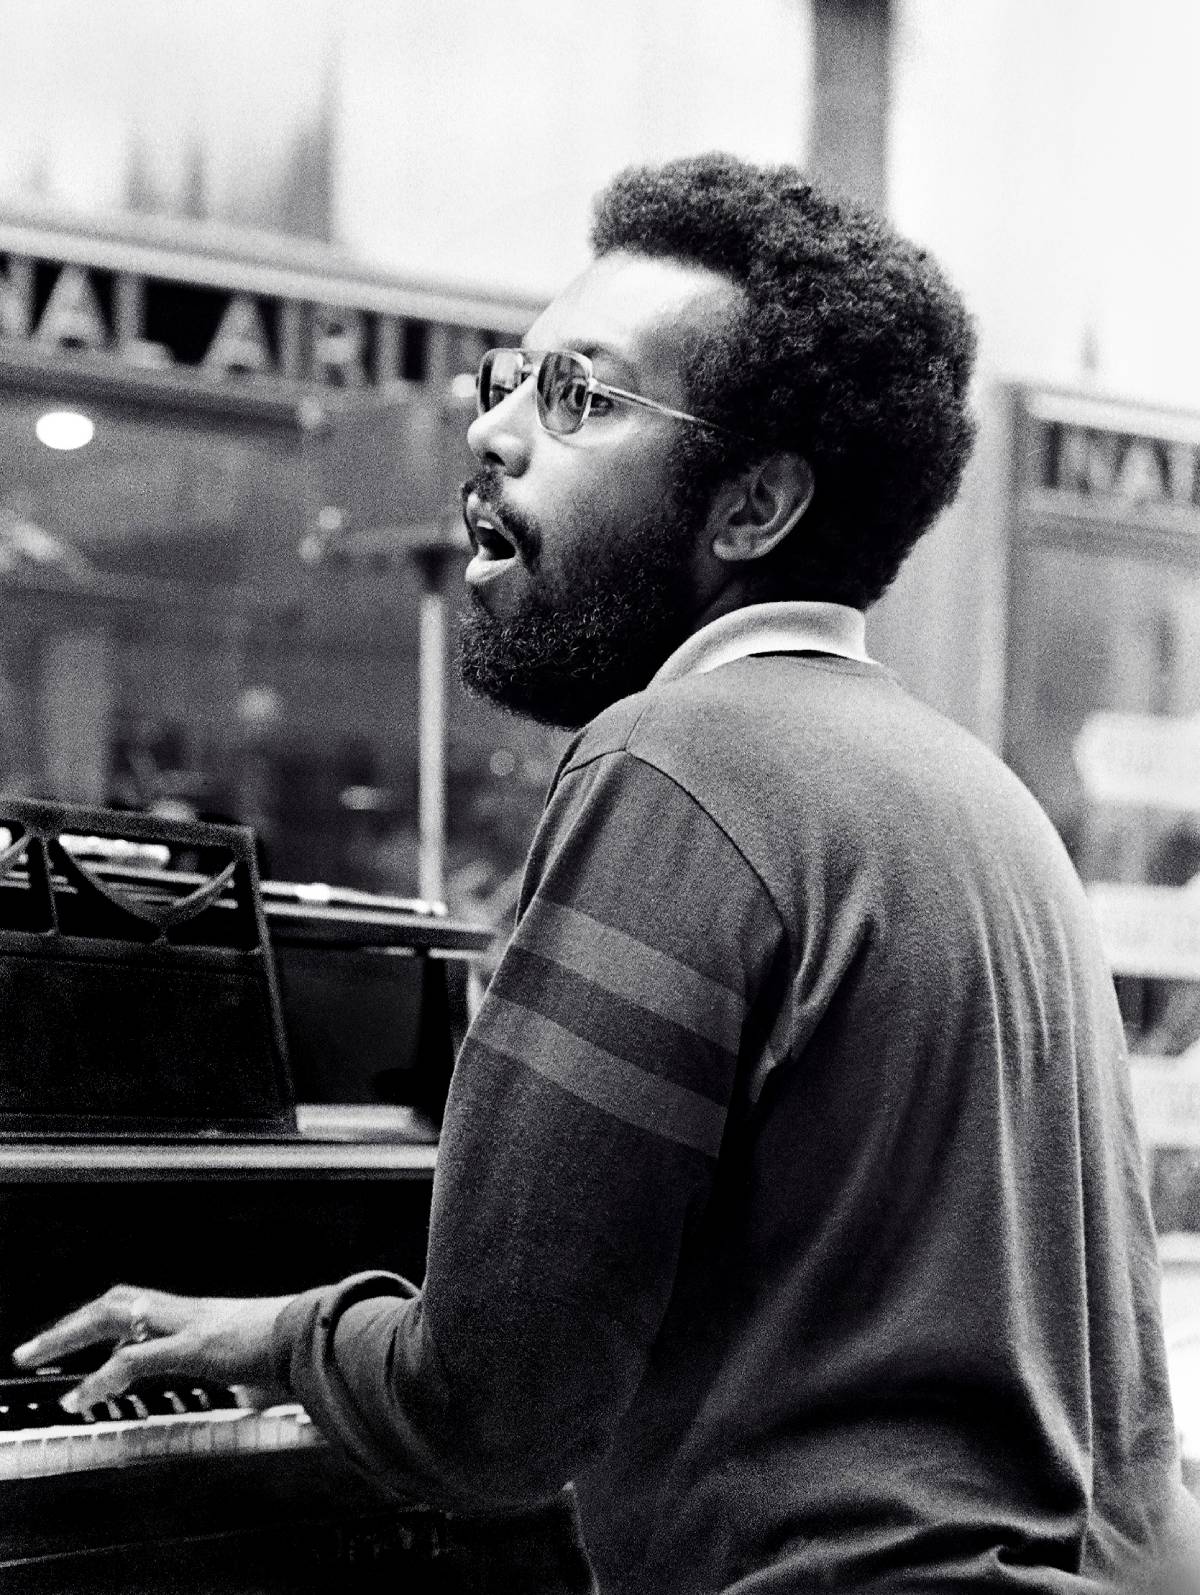 Stanley Cowell (stanley Cowell) in his youth